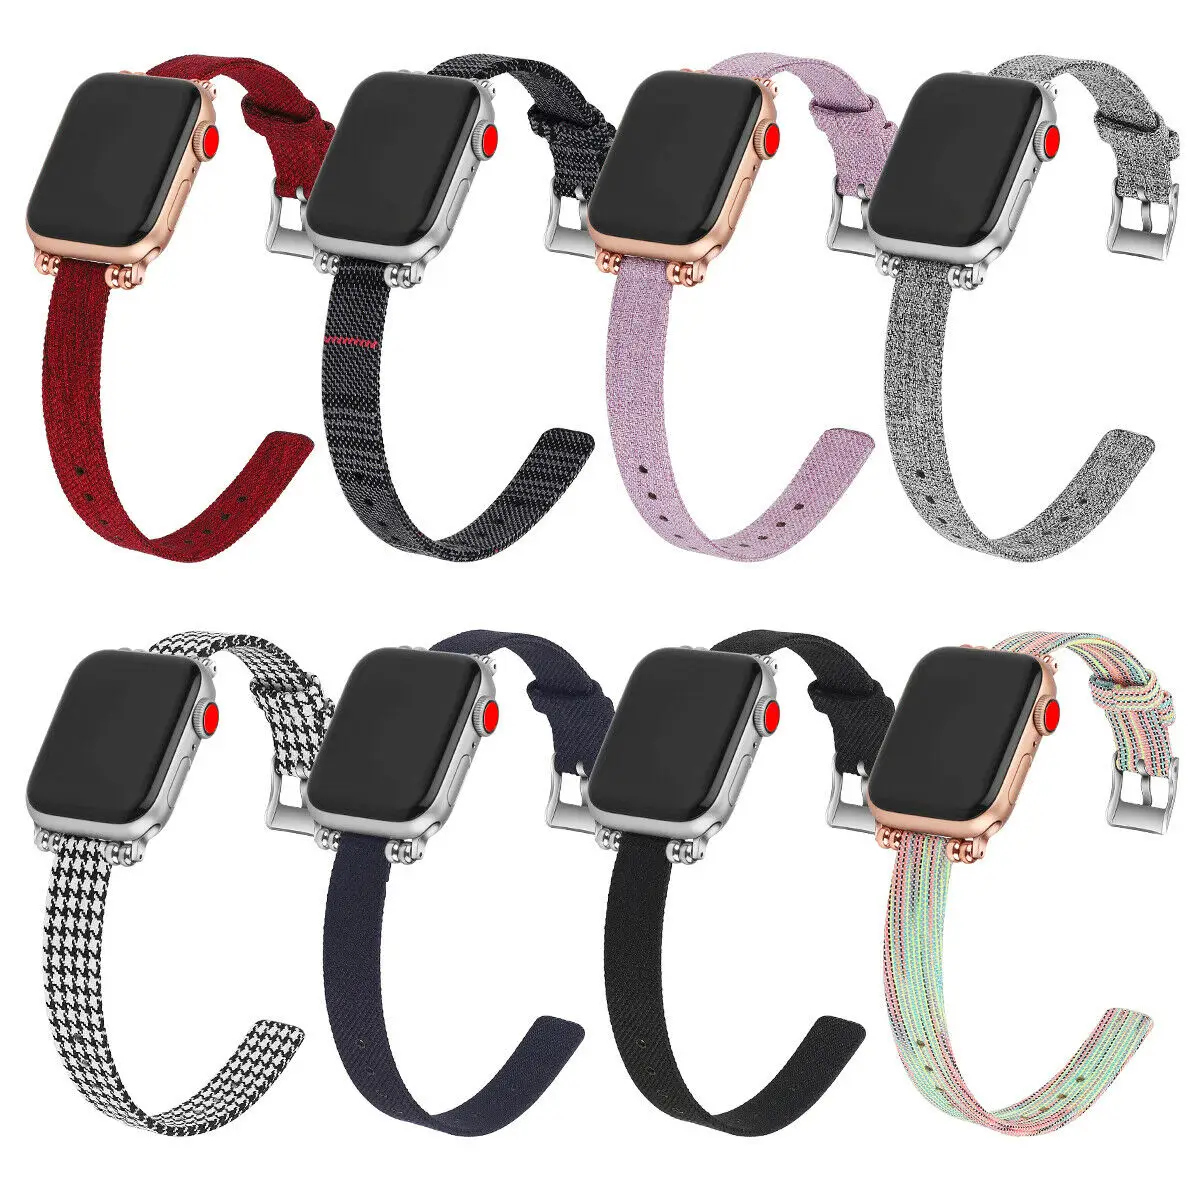 

Fashion Girls Women Plaid Fabric Wristband Braclet for Apple Watch Band 44mm 40mm 38mm 42mm Slim Watch Strap, Multi colors